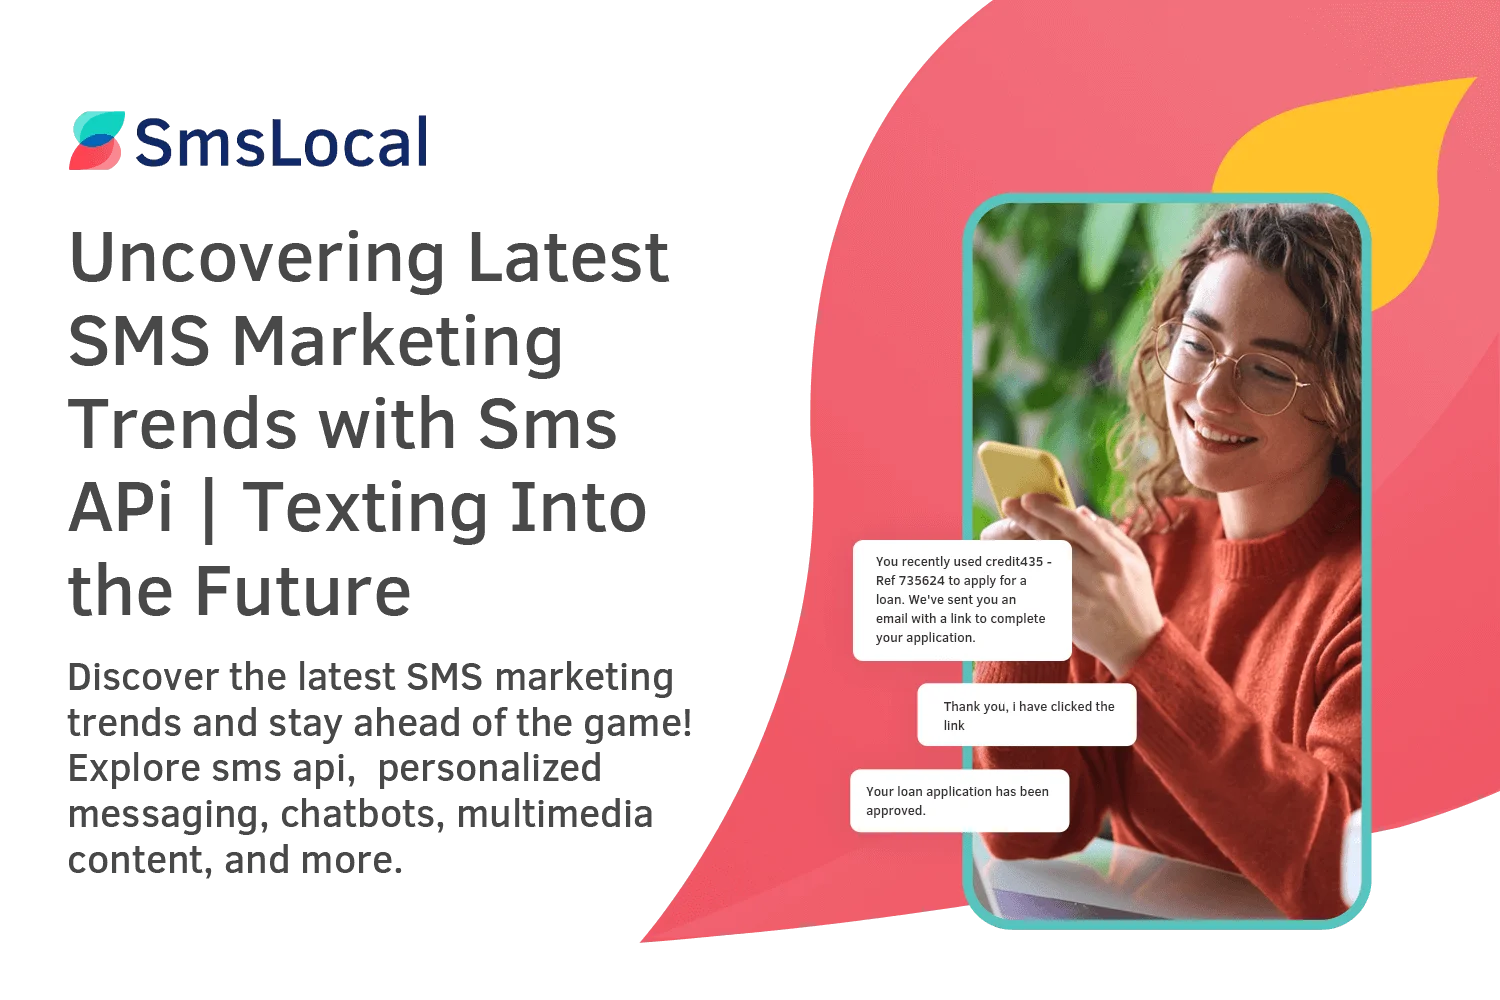 SMS Marketing Trends